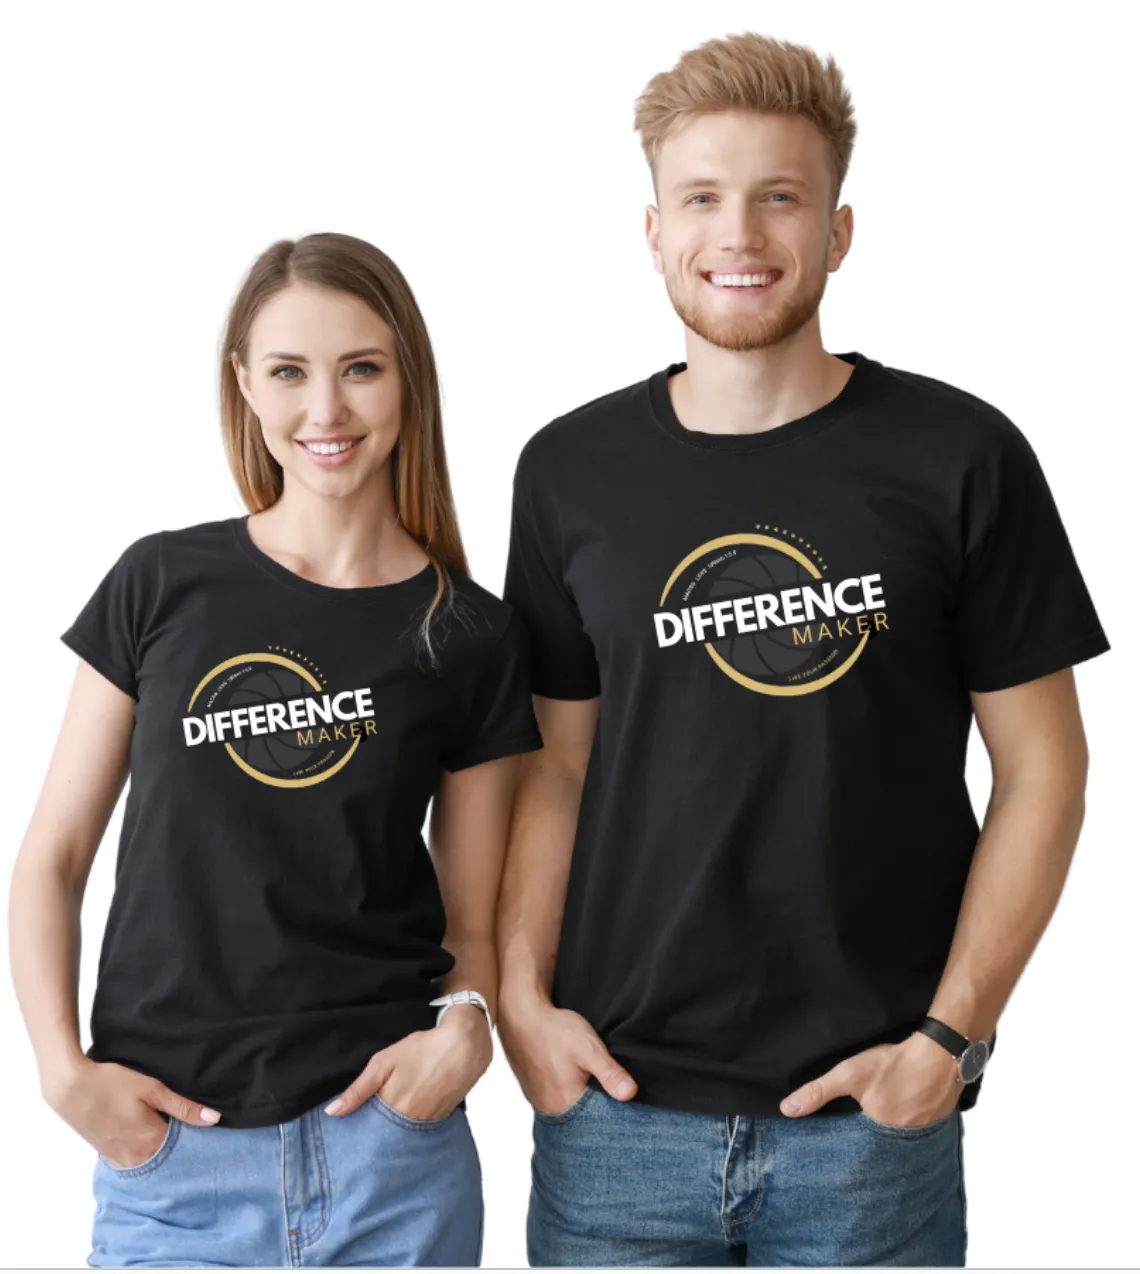 Earn the right to wear the Difference Maker shirt!